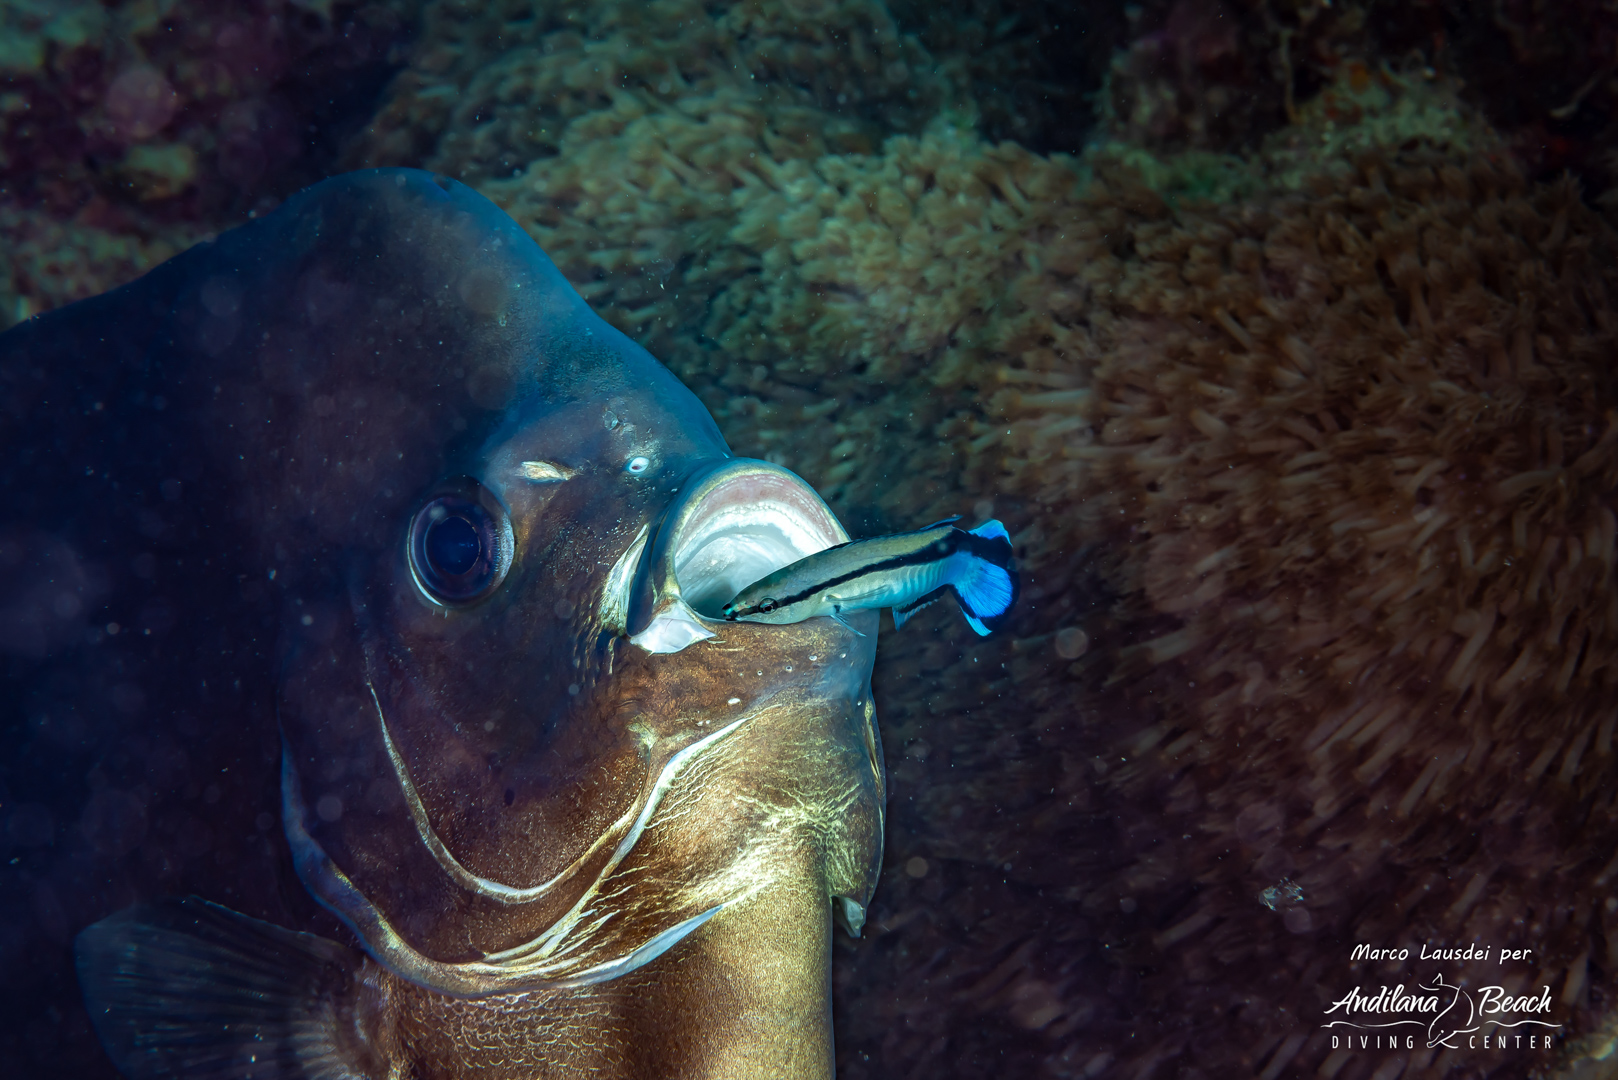 Tanikely 20-7-19 (Ghostpipe) (5) | Andilana Beach Diving Center - Nosy